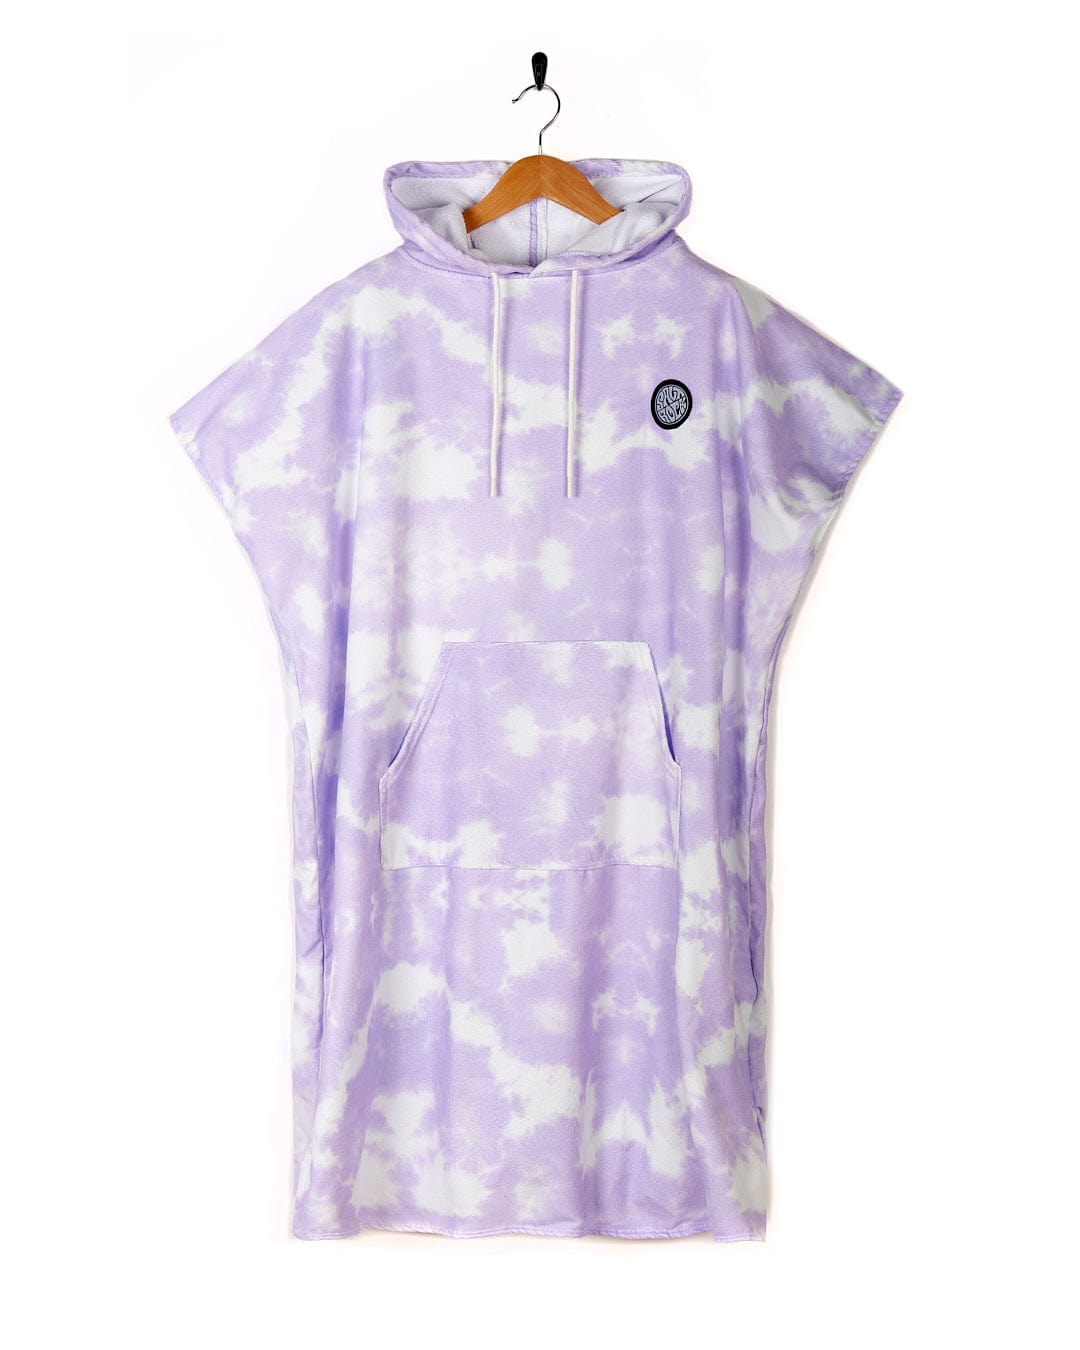 Purple and white Ubud - Womens Tie Dye Changing Towel - Light Purple hooded changing towel with a front pocket, displayed on a hanger against a white background by Saltrock.